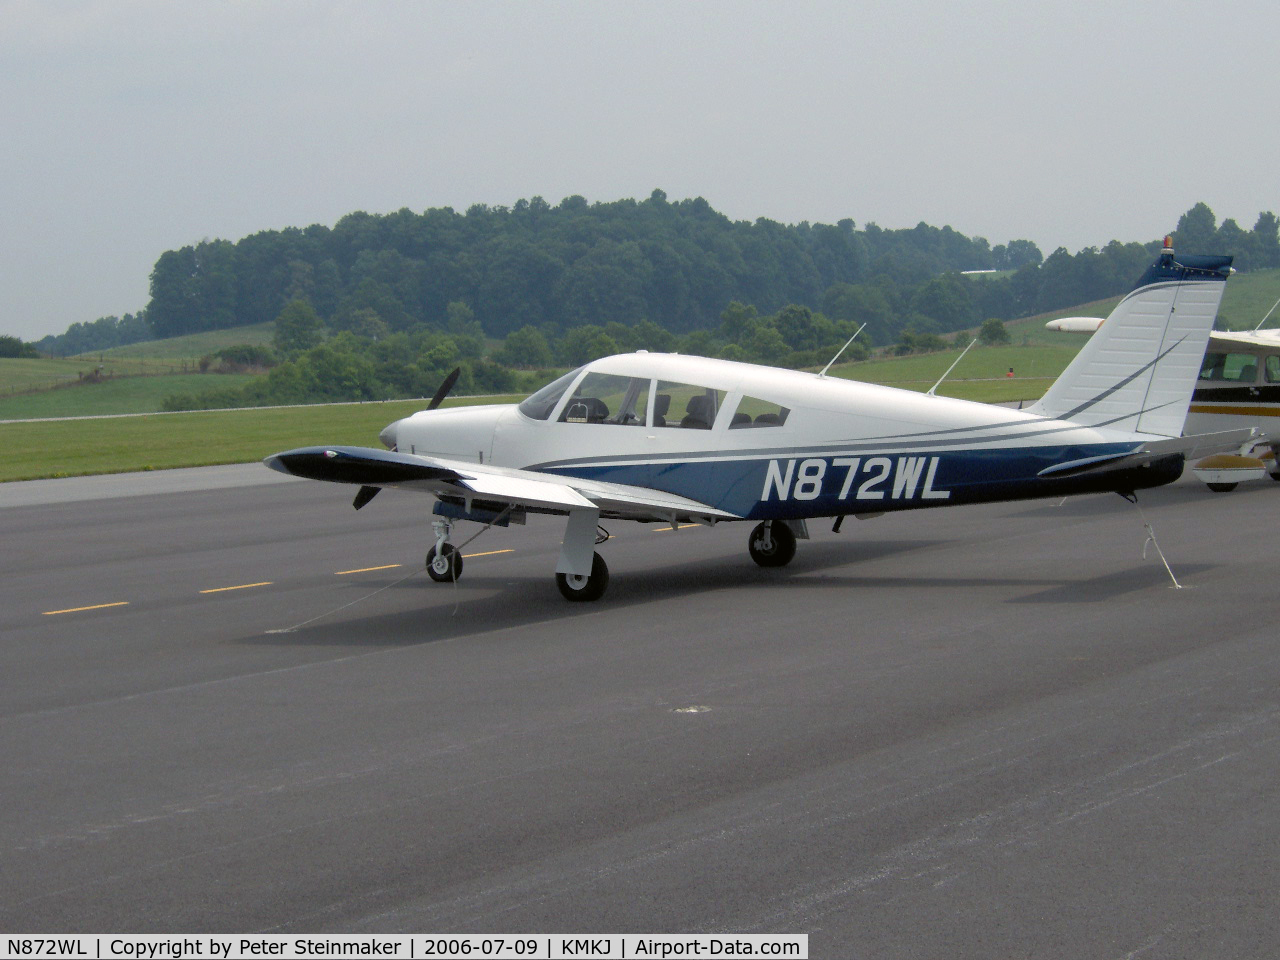 N872WL, 1971 Piper PA-28R-200 C/N 28R-7135123, Parked on the ramp.